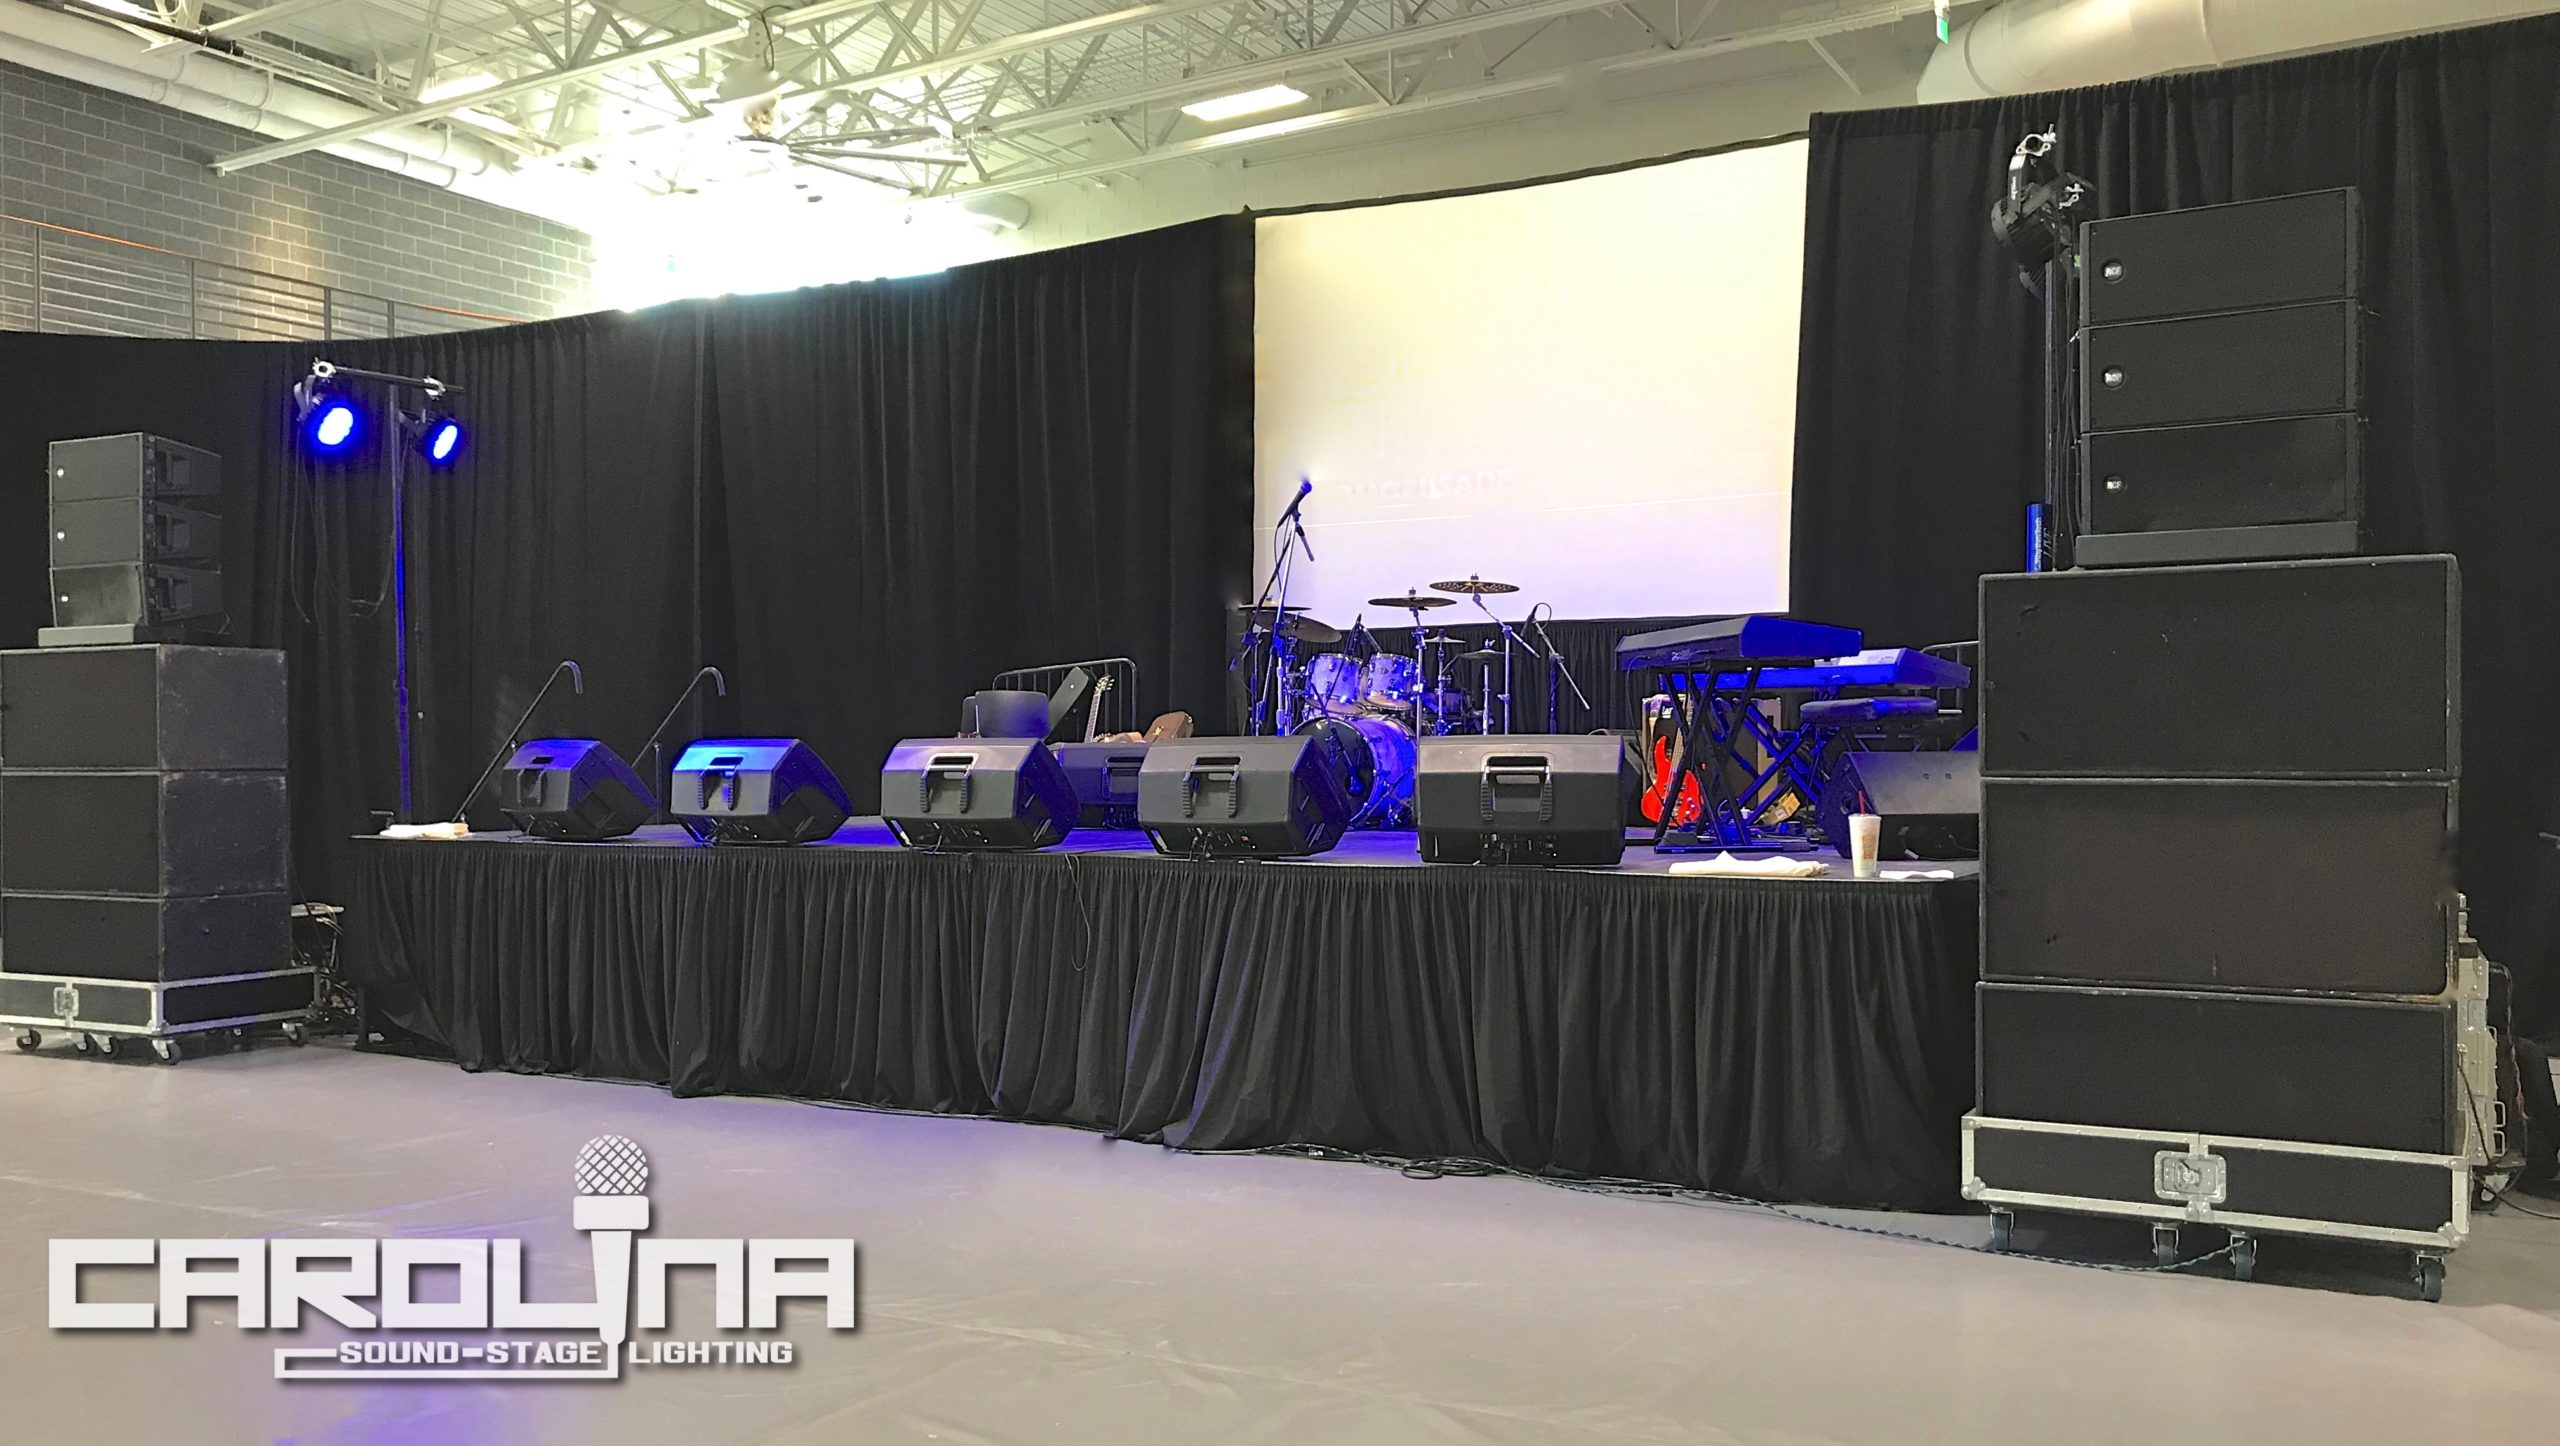 24'x16' stage equipped with RCF/JBL audio, black velour pipe & drape backdrop, rear video projection screen, band backline, and basic LED stage wash lighting